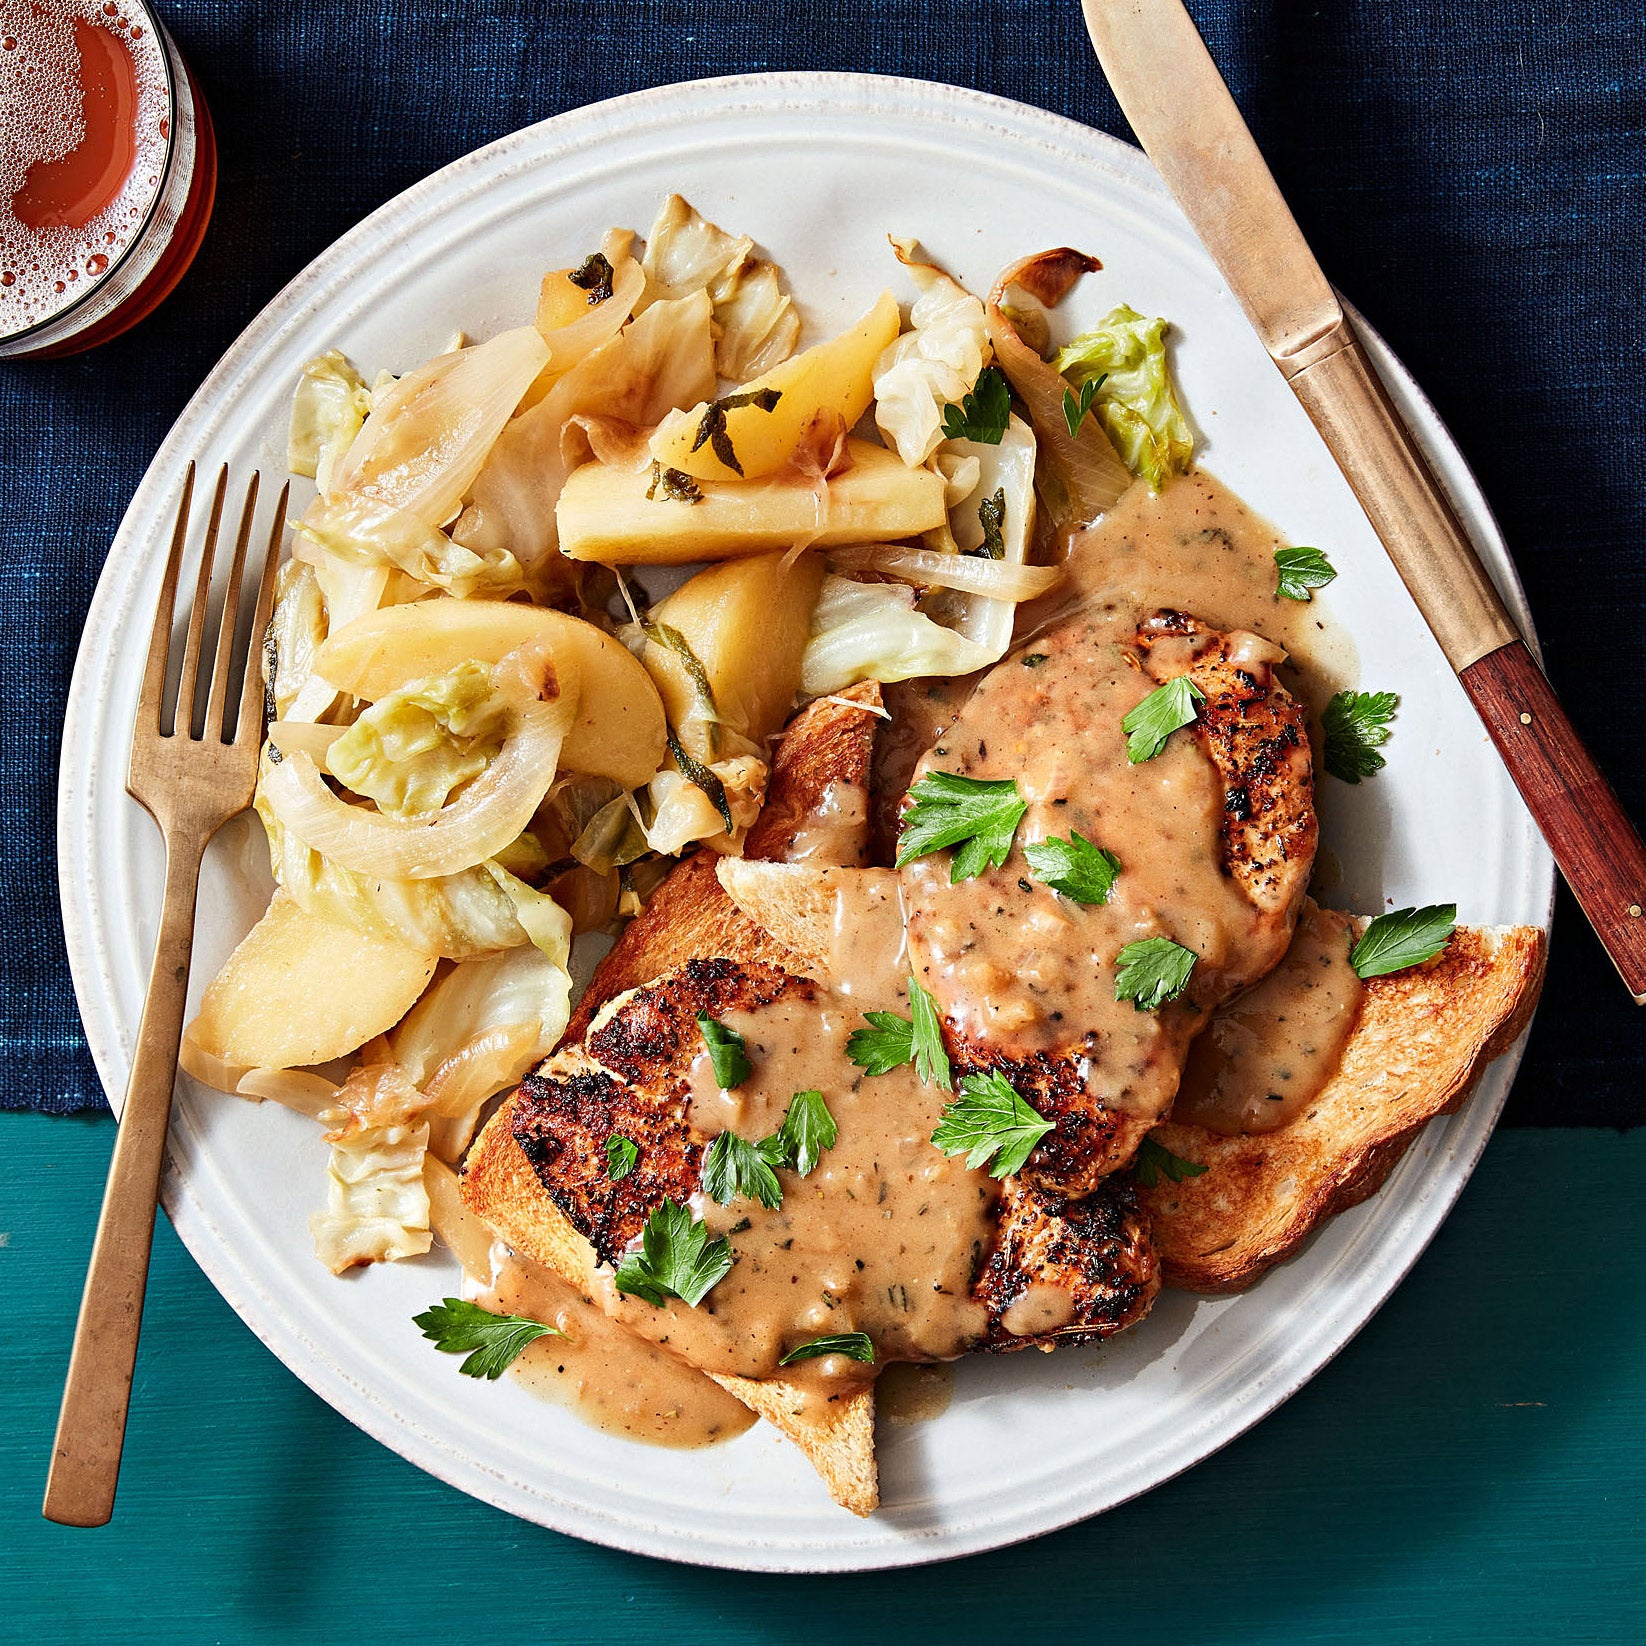 Rachael Ray's Turkey Cutlets with Cabbage, Apples & Onions & Cider Gravy